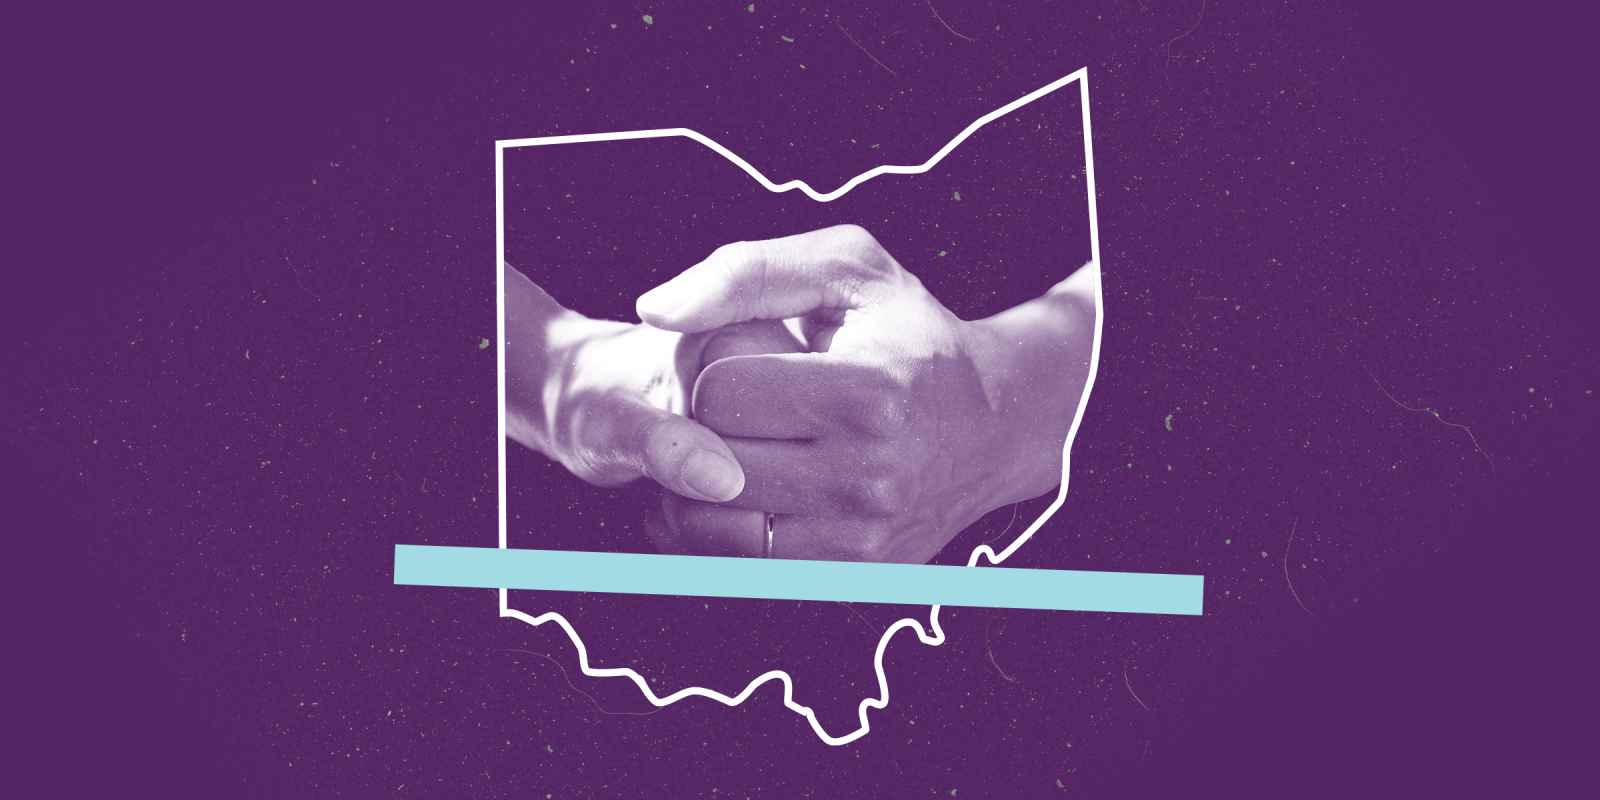 Two hands holding each other in the outline of the state of Ohio